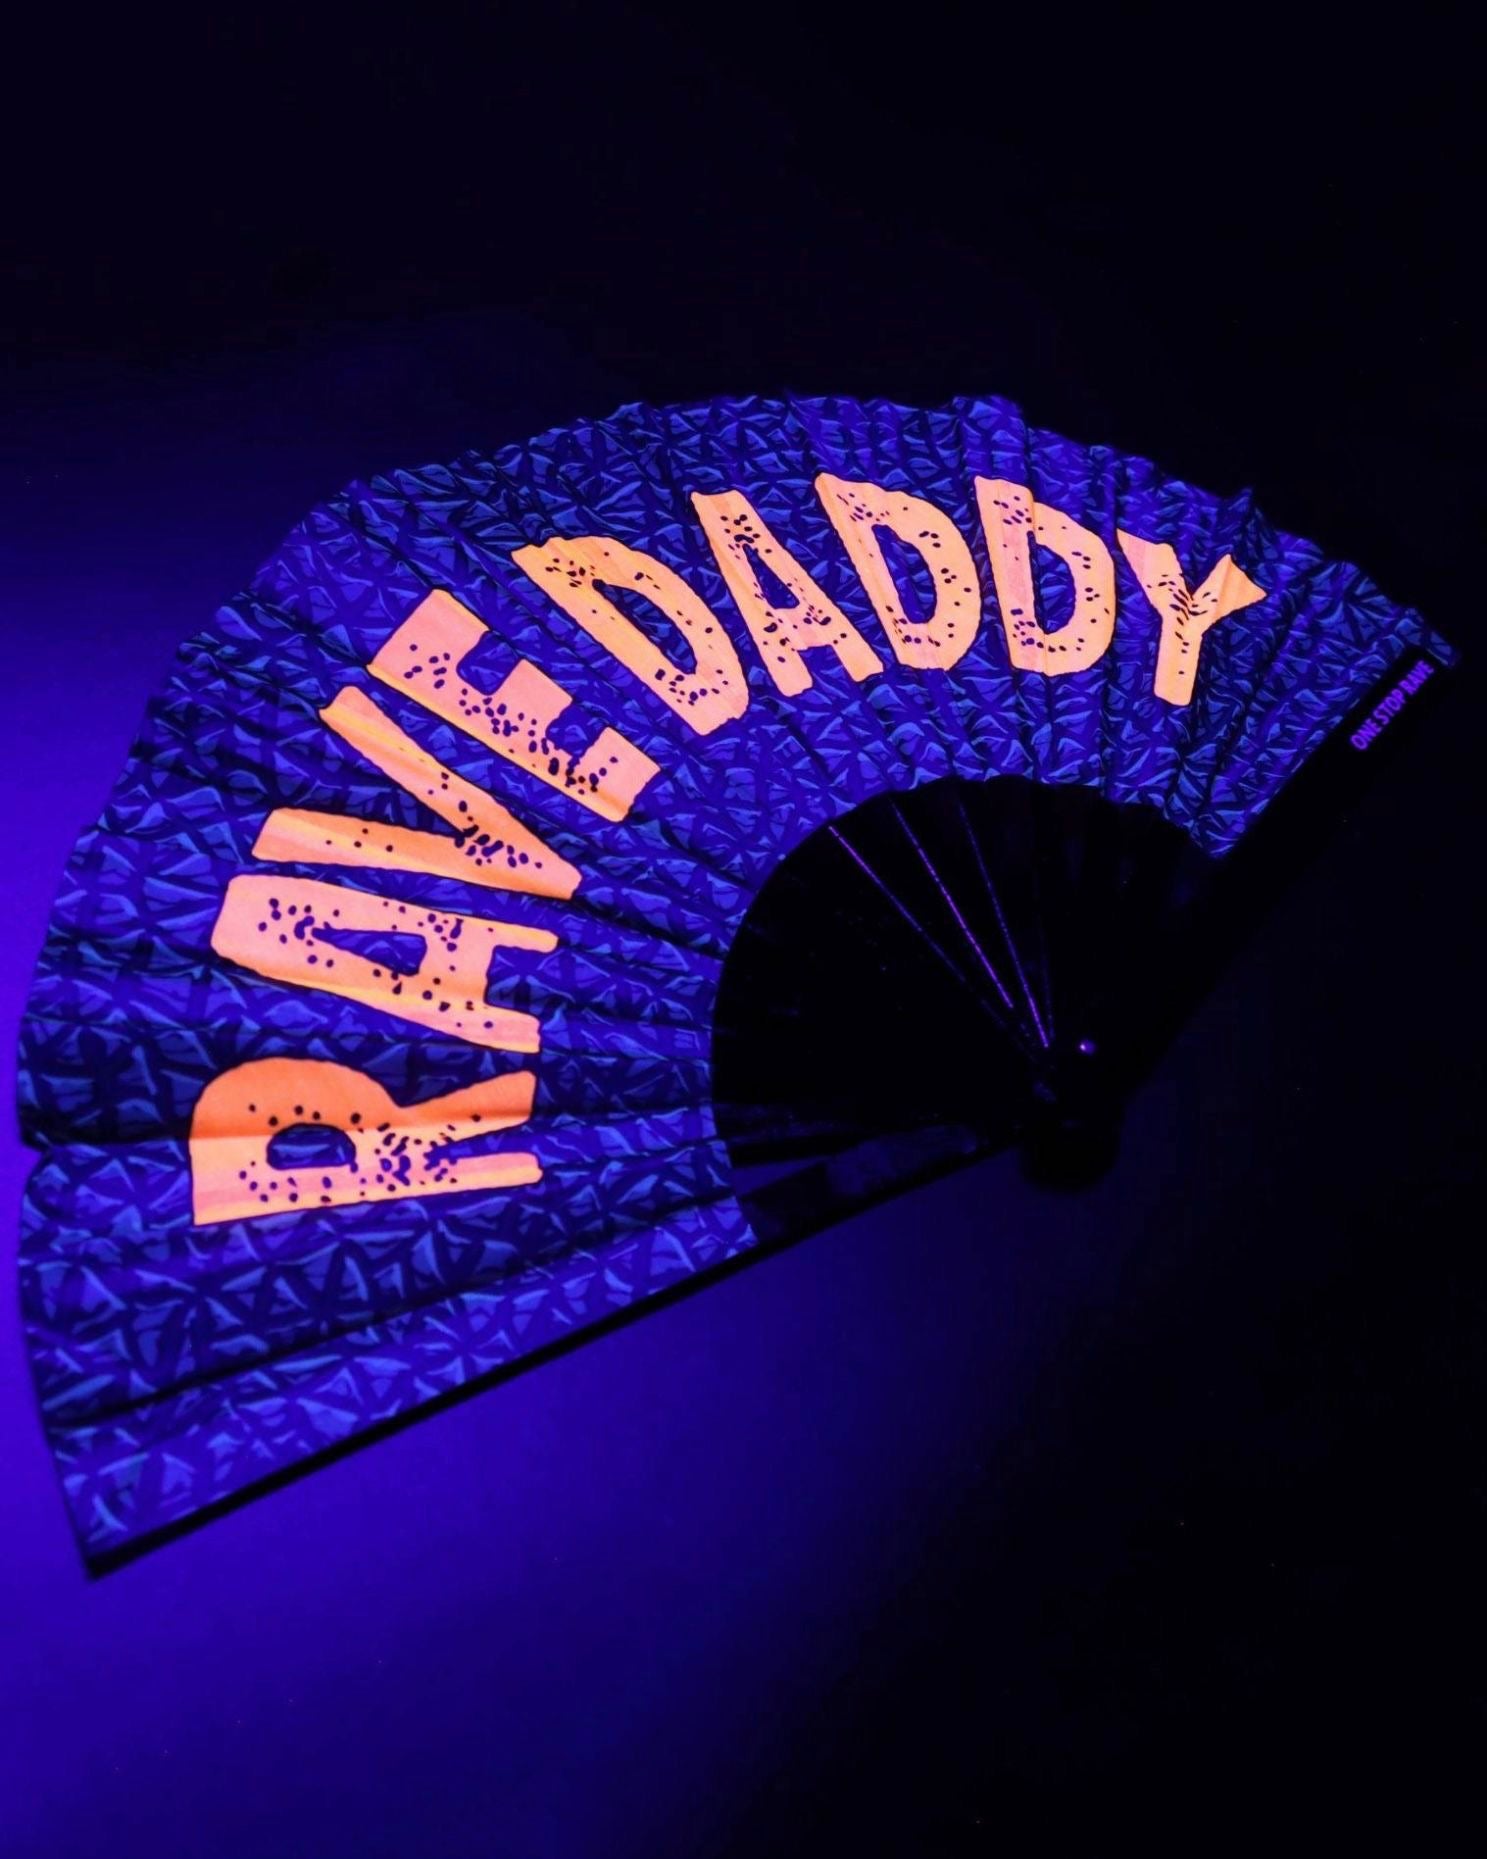 Rave Daddy Hand Fan, Festival Fans 13.5", - One Stop Rave